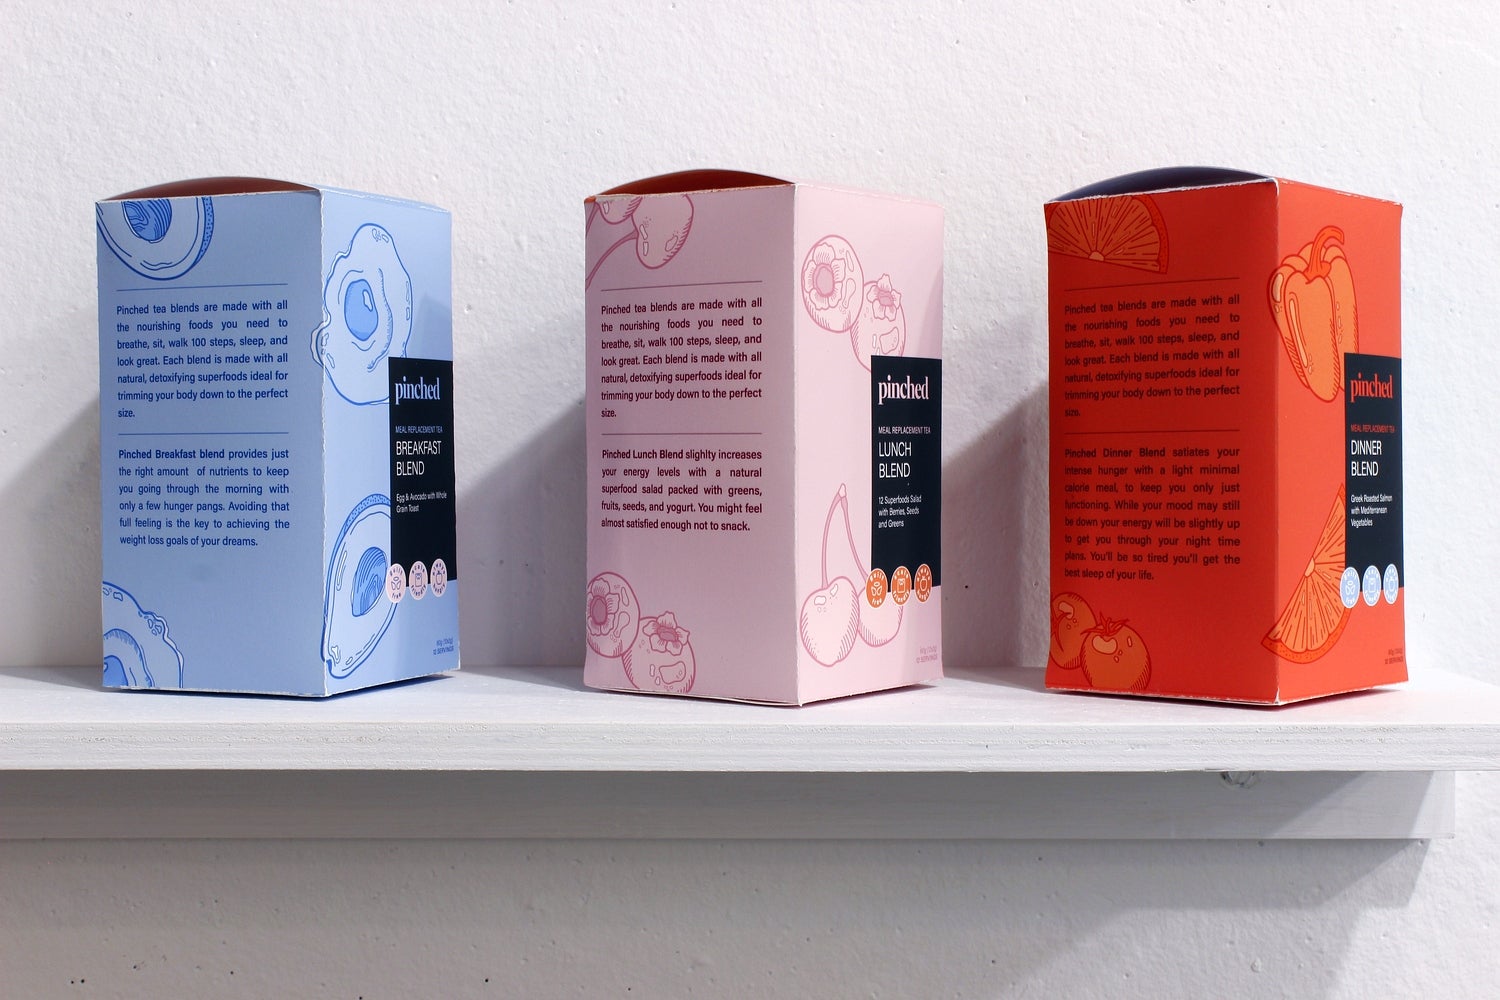 Art installation of shelf with 3 boxes of fake meal replacement tea with side labels describing teas